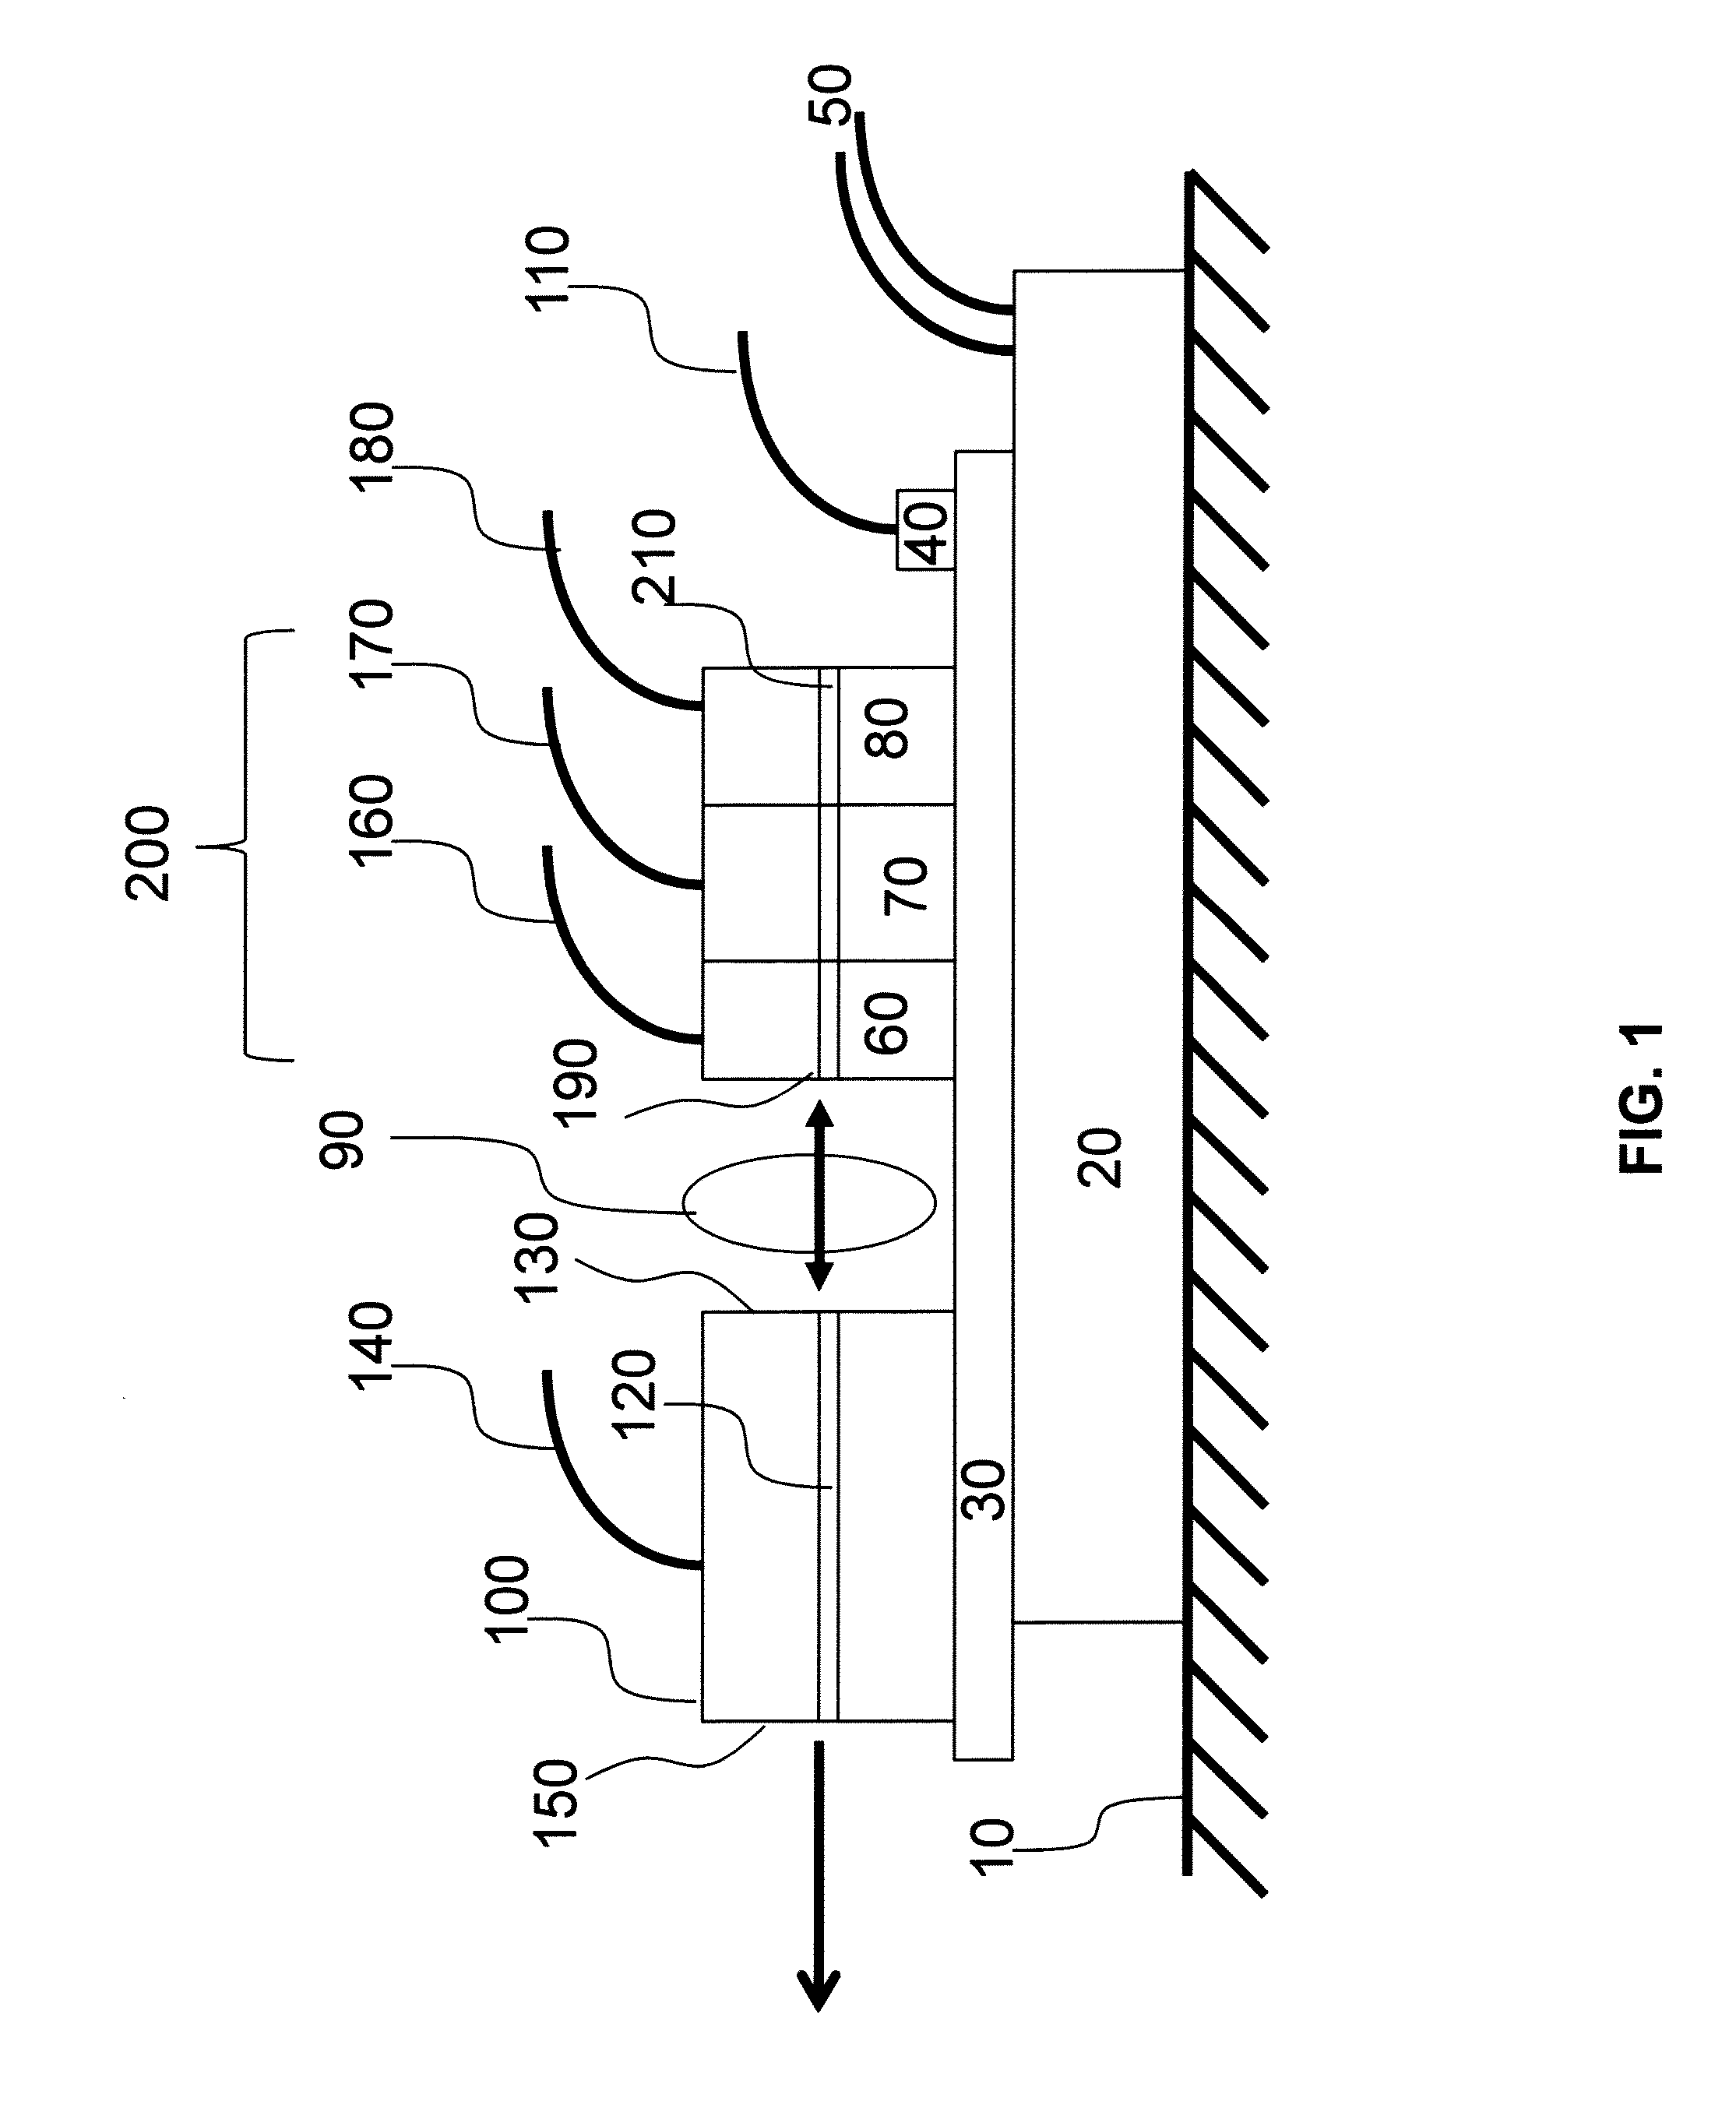 External cavity widely tunable laser using a silicon resonator and micromechanically adjustable coupling